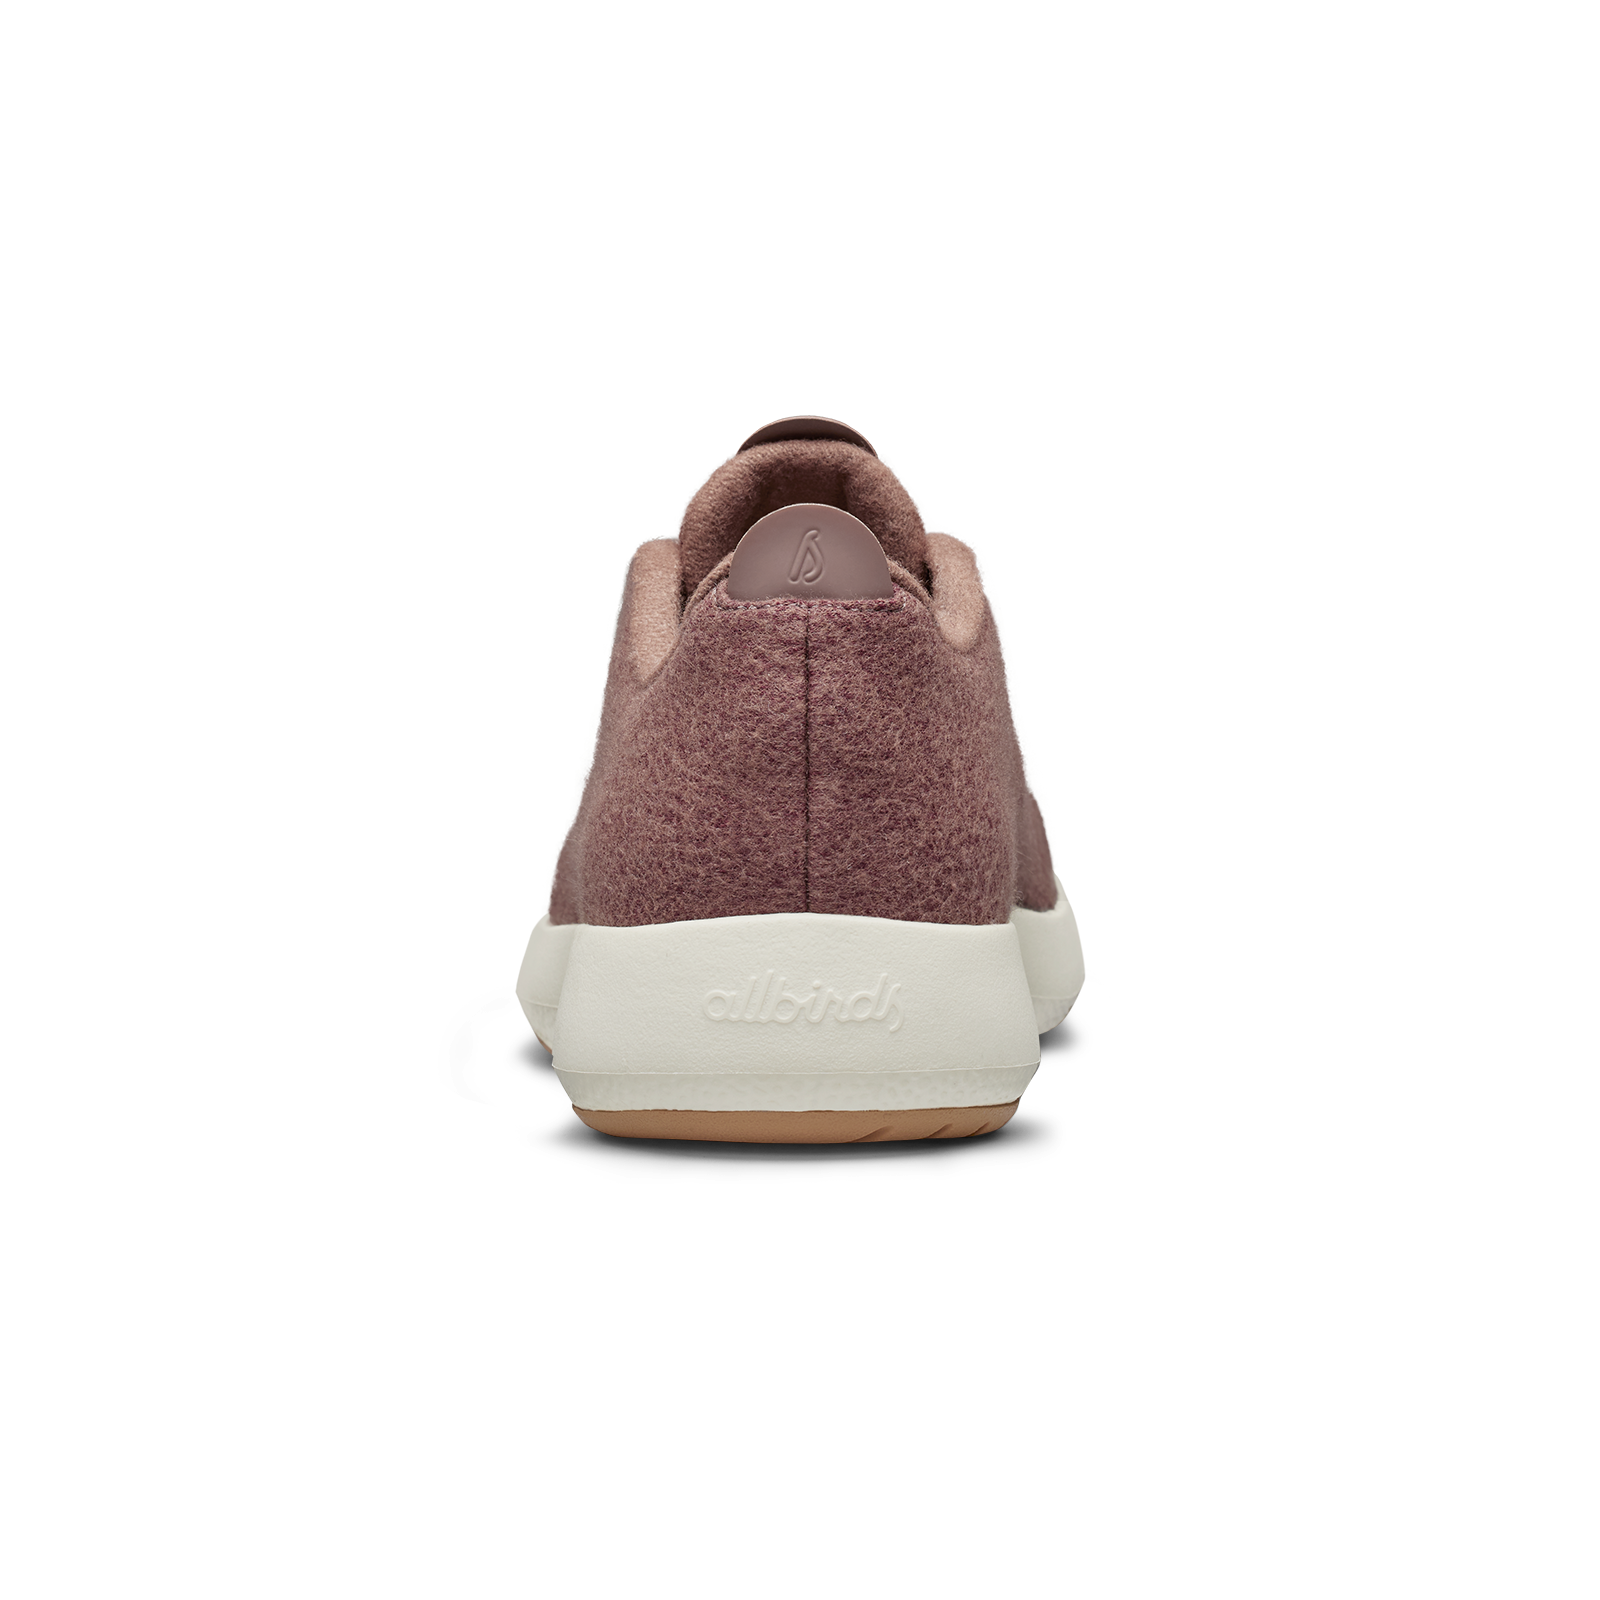 Women's Wool Runner Mizzles - Stormy Mauve (Natural White Sole)